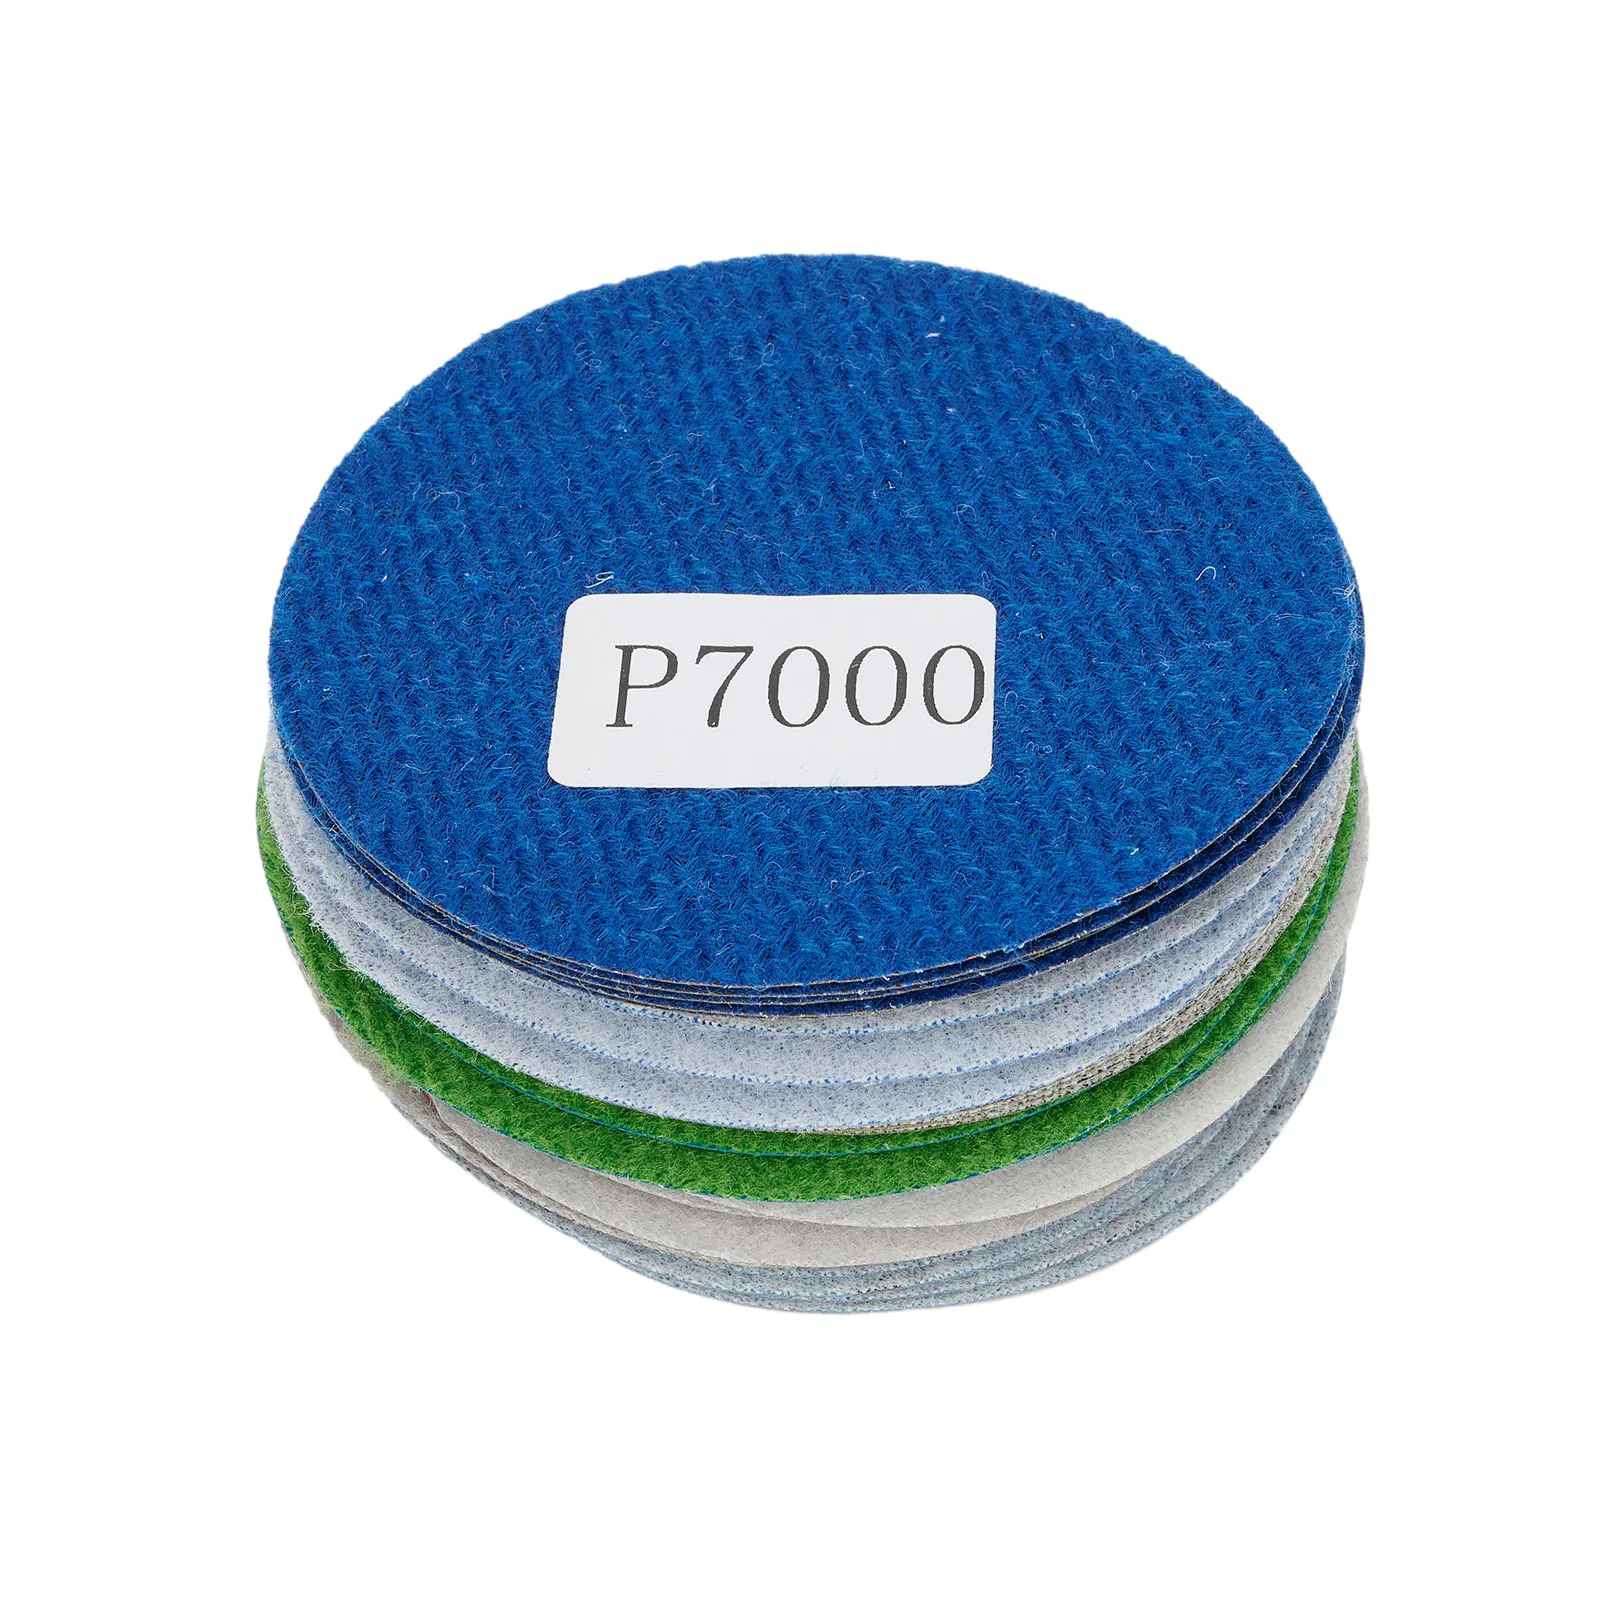 5 inch 125mm backing pad sanding pad for bosch pex 300 ae 400 ae 4000 ae polishing backing pads grinding tools sanding pad Durable Accessories Sanding discs Polishing Sandpaper Tools Waterproof Wet & Dry 1000/2000/3000/4000/5000/7000 grit 30pcs